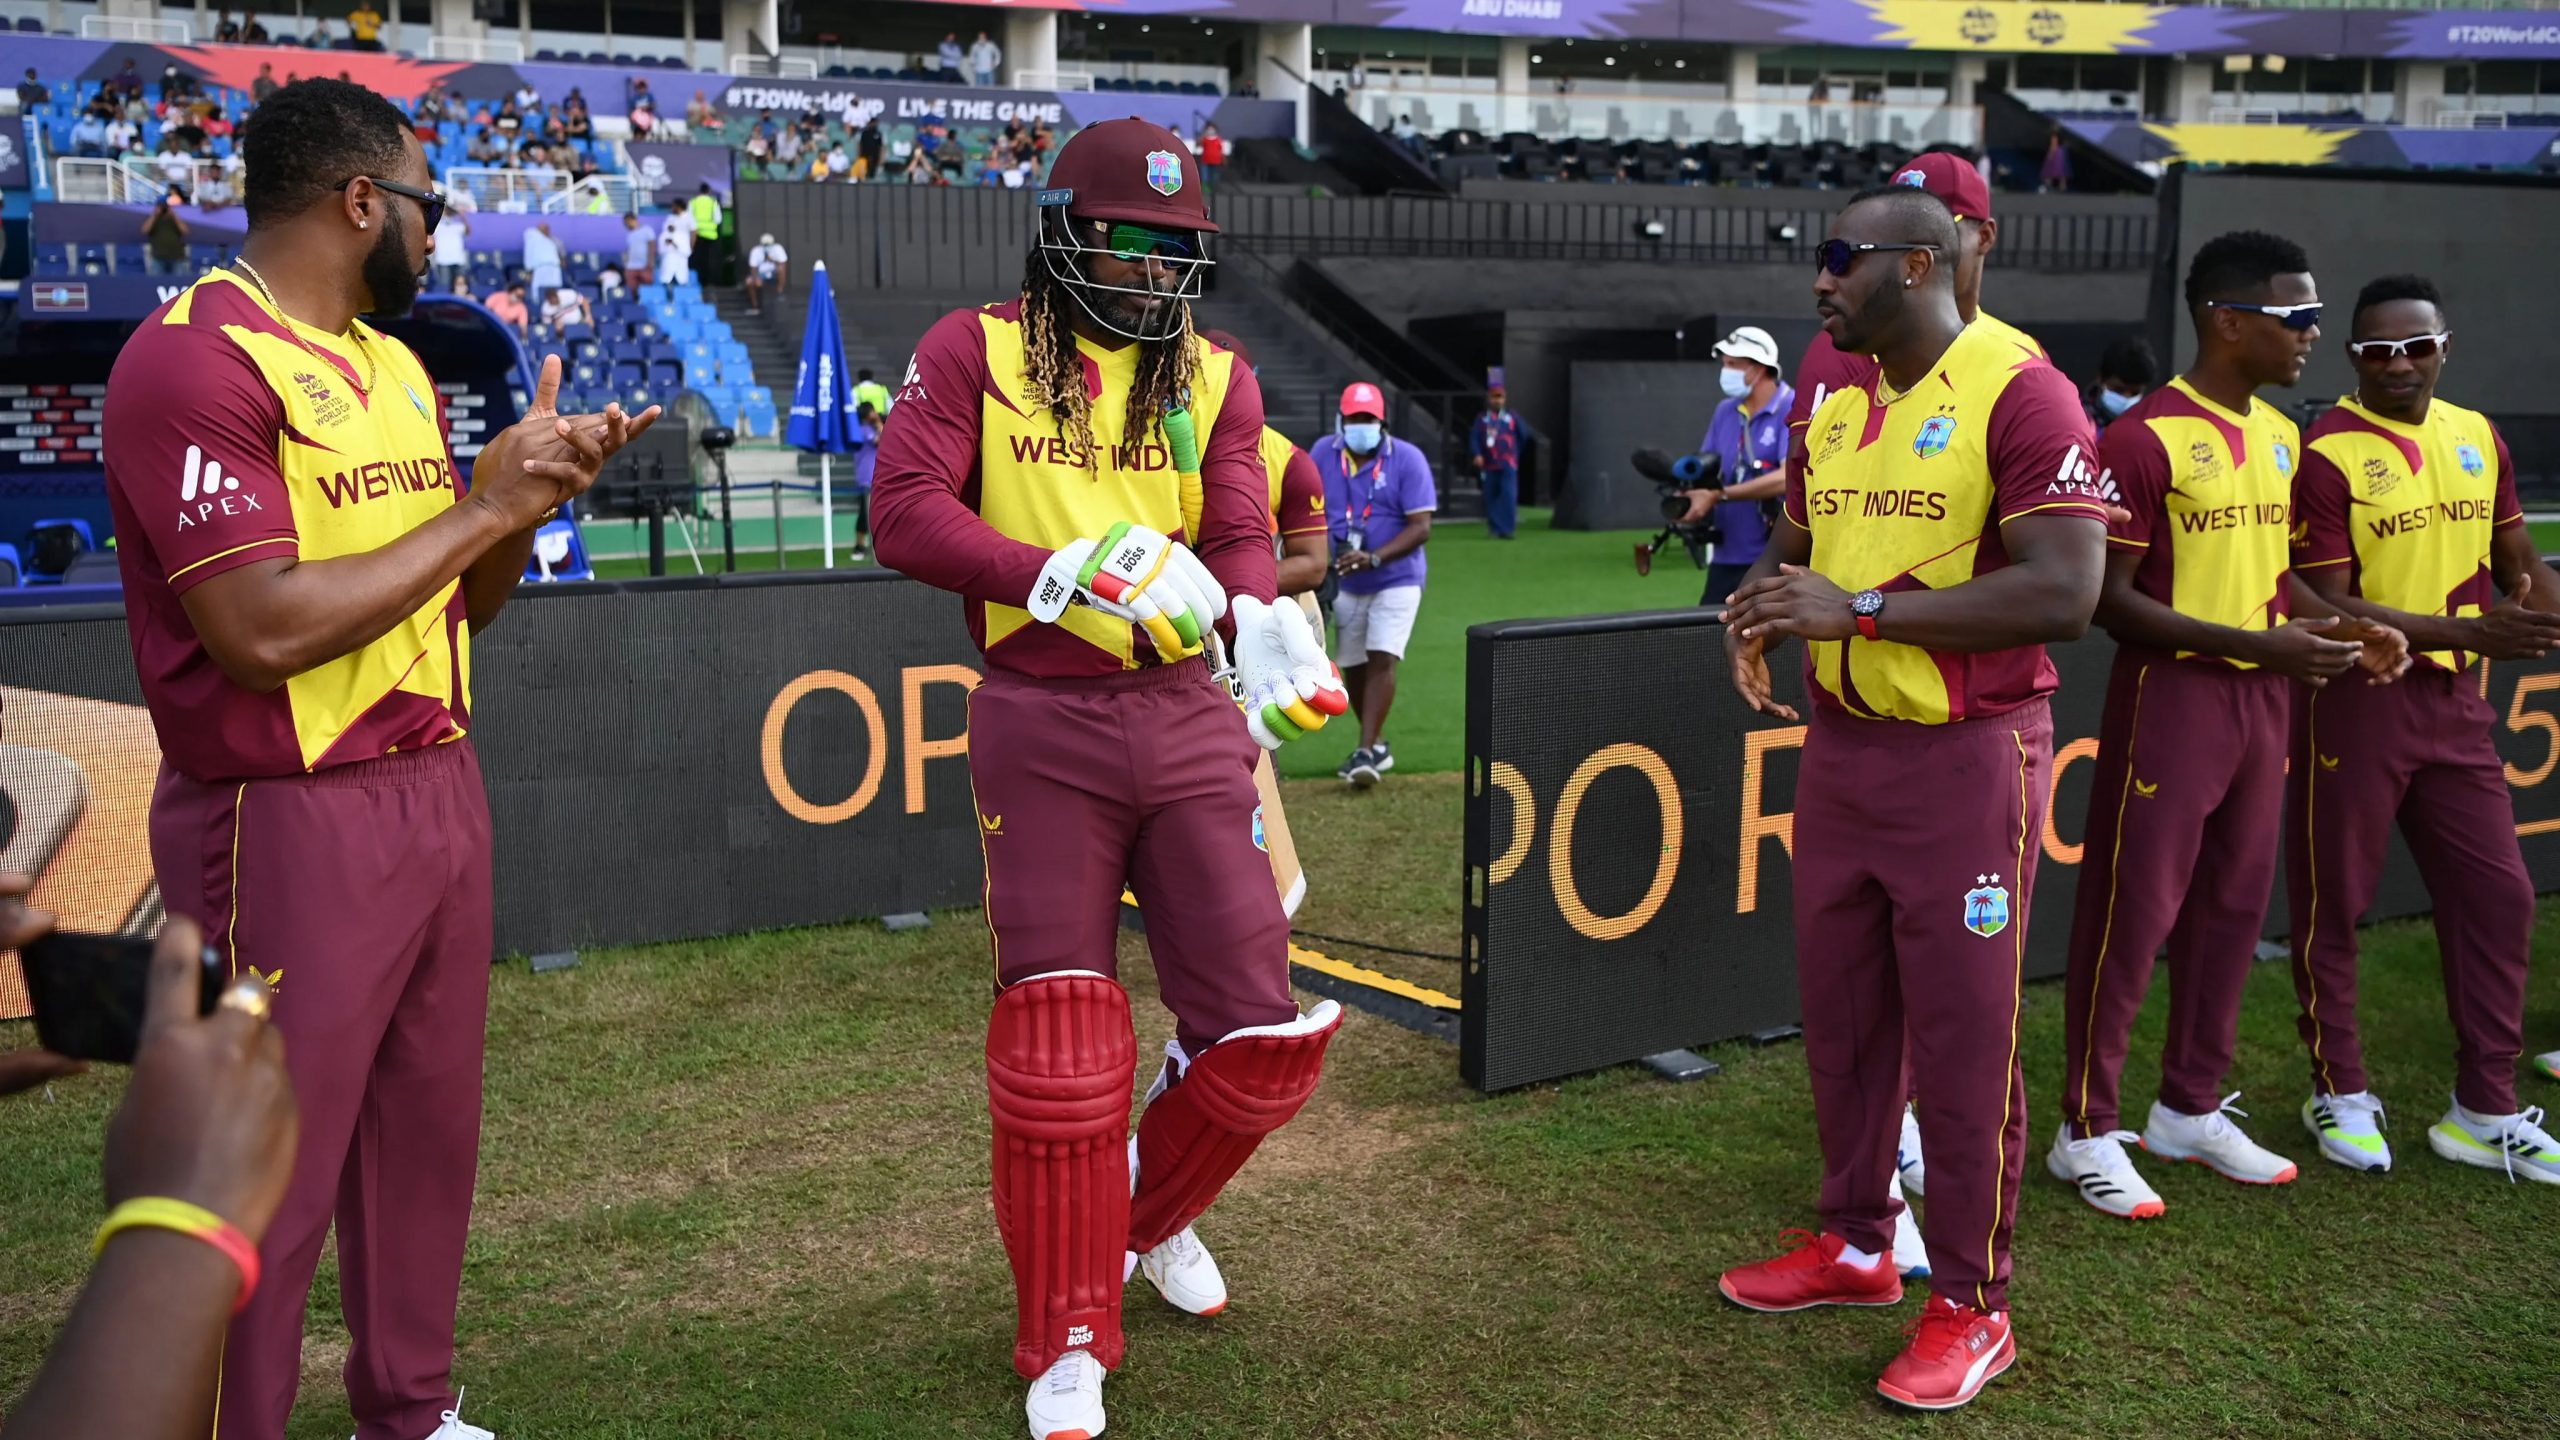 Last dance? Gayle hoping for farewell game in Jamaica amid retirement talks